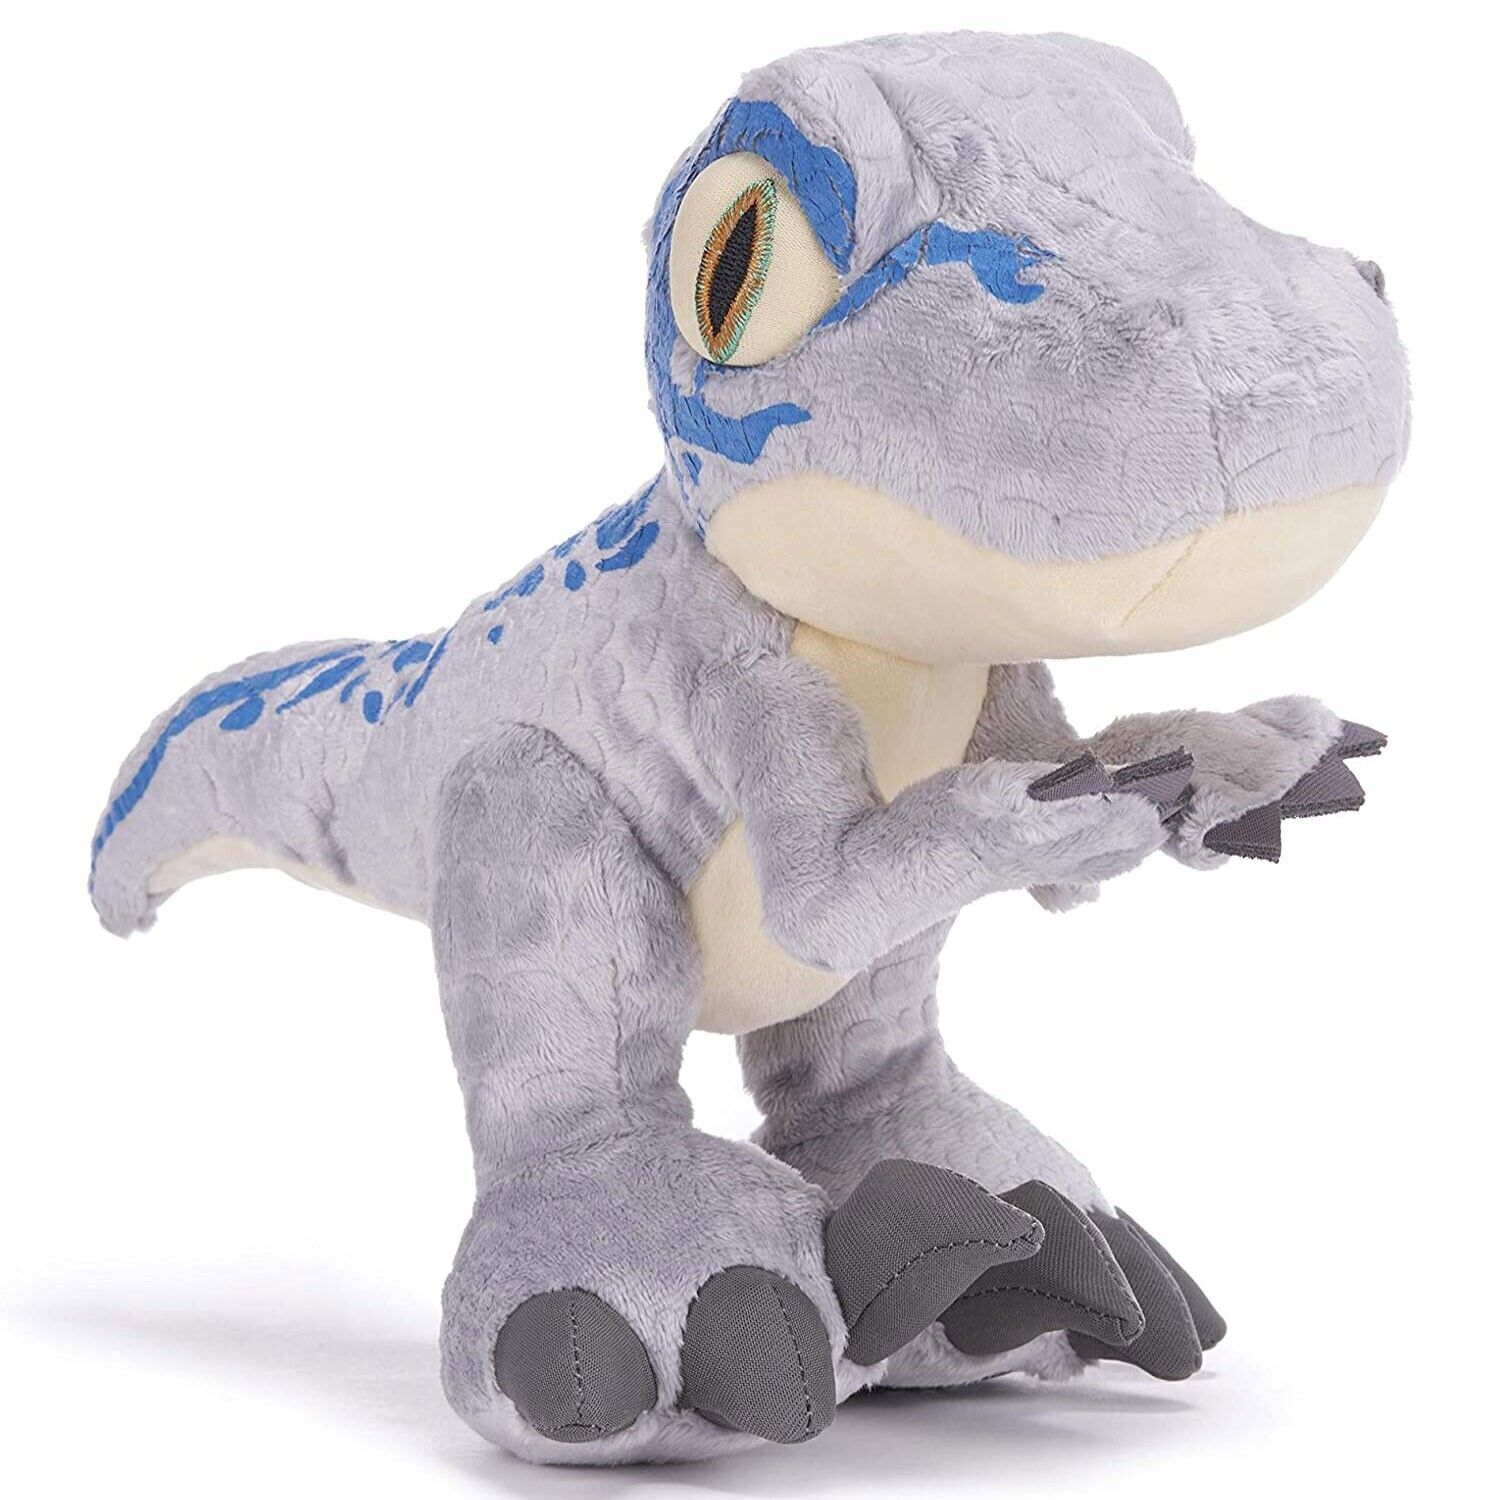 "New Jurassic World 18" Chunky Plush Blue Raptor - Perfect Gift for Dino Fans!"